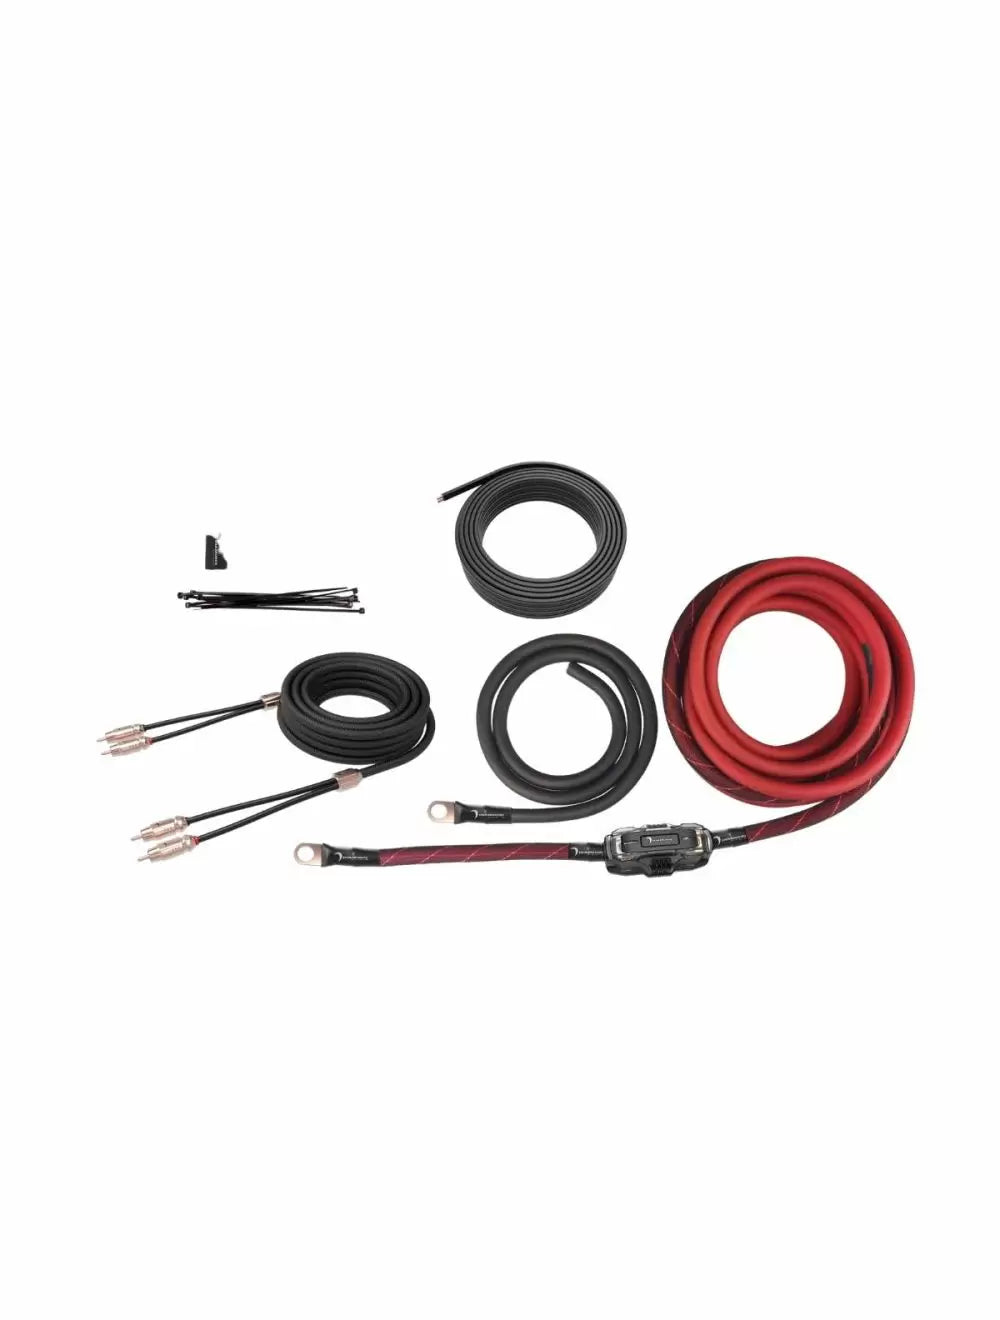 Diamond Audio HX02 2-Channel 0 Gauge Amplifier Installation Kit W/ RCA Interconnect and 20 ft Speaker Cable